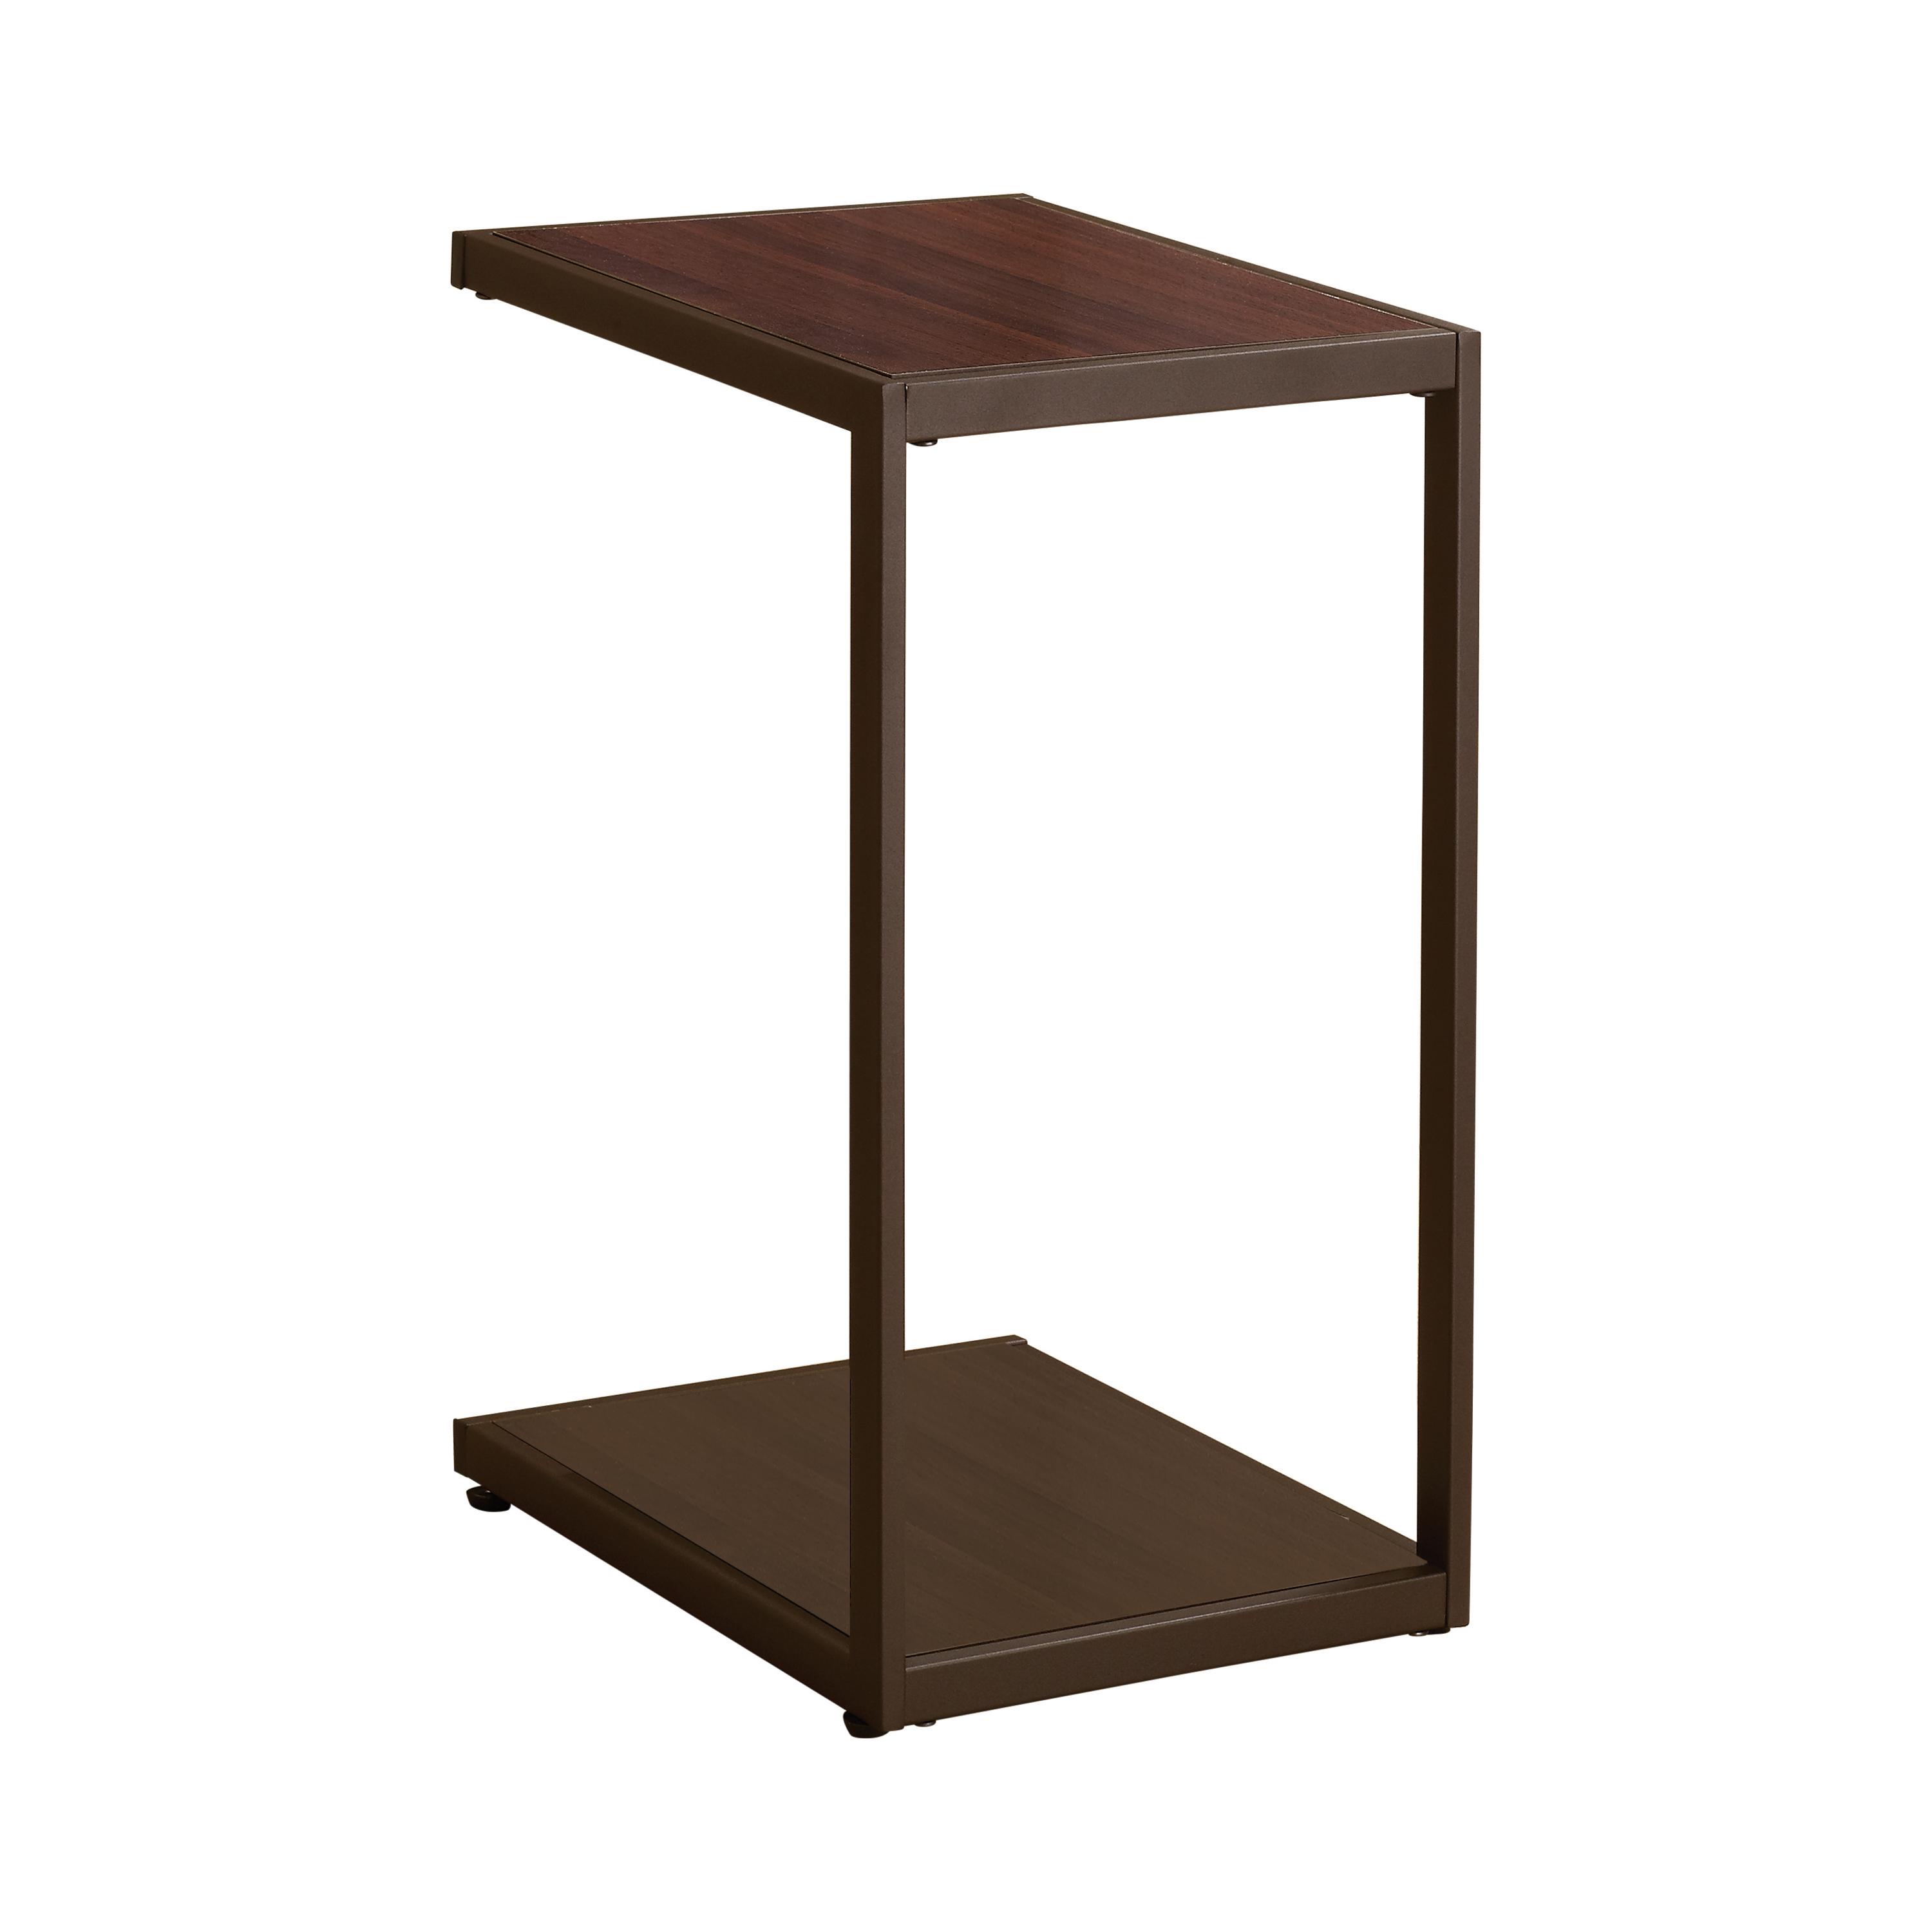 Contemporary Accent Table 901007 901007 in Brown 